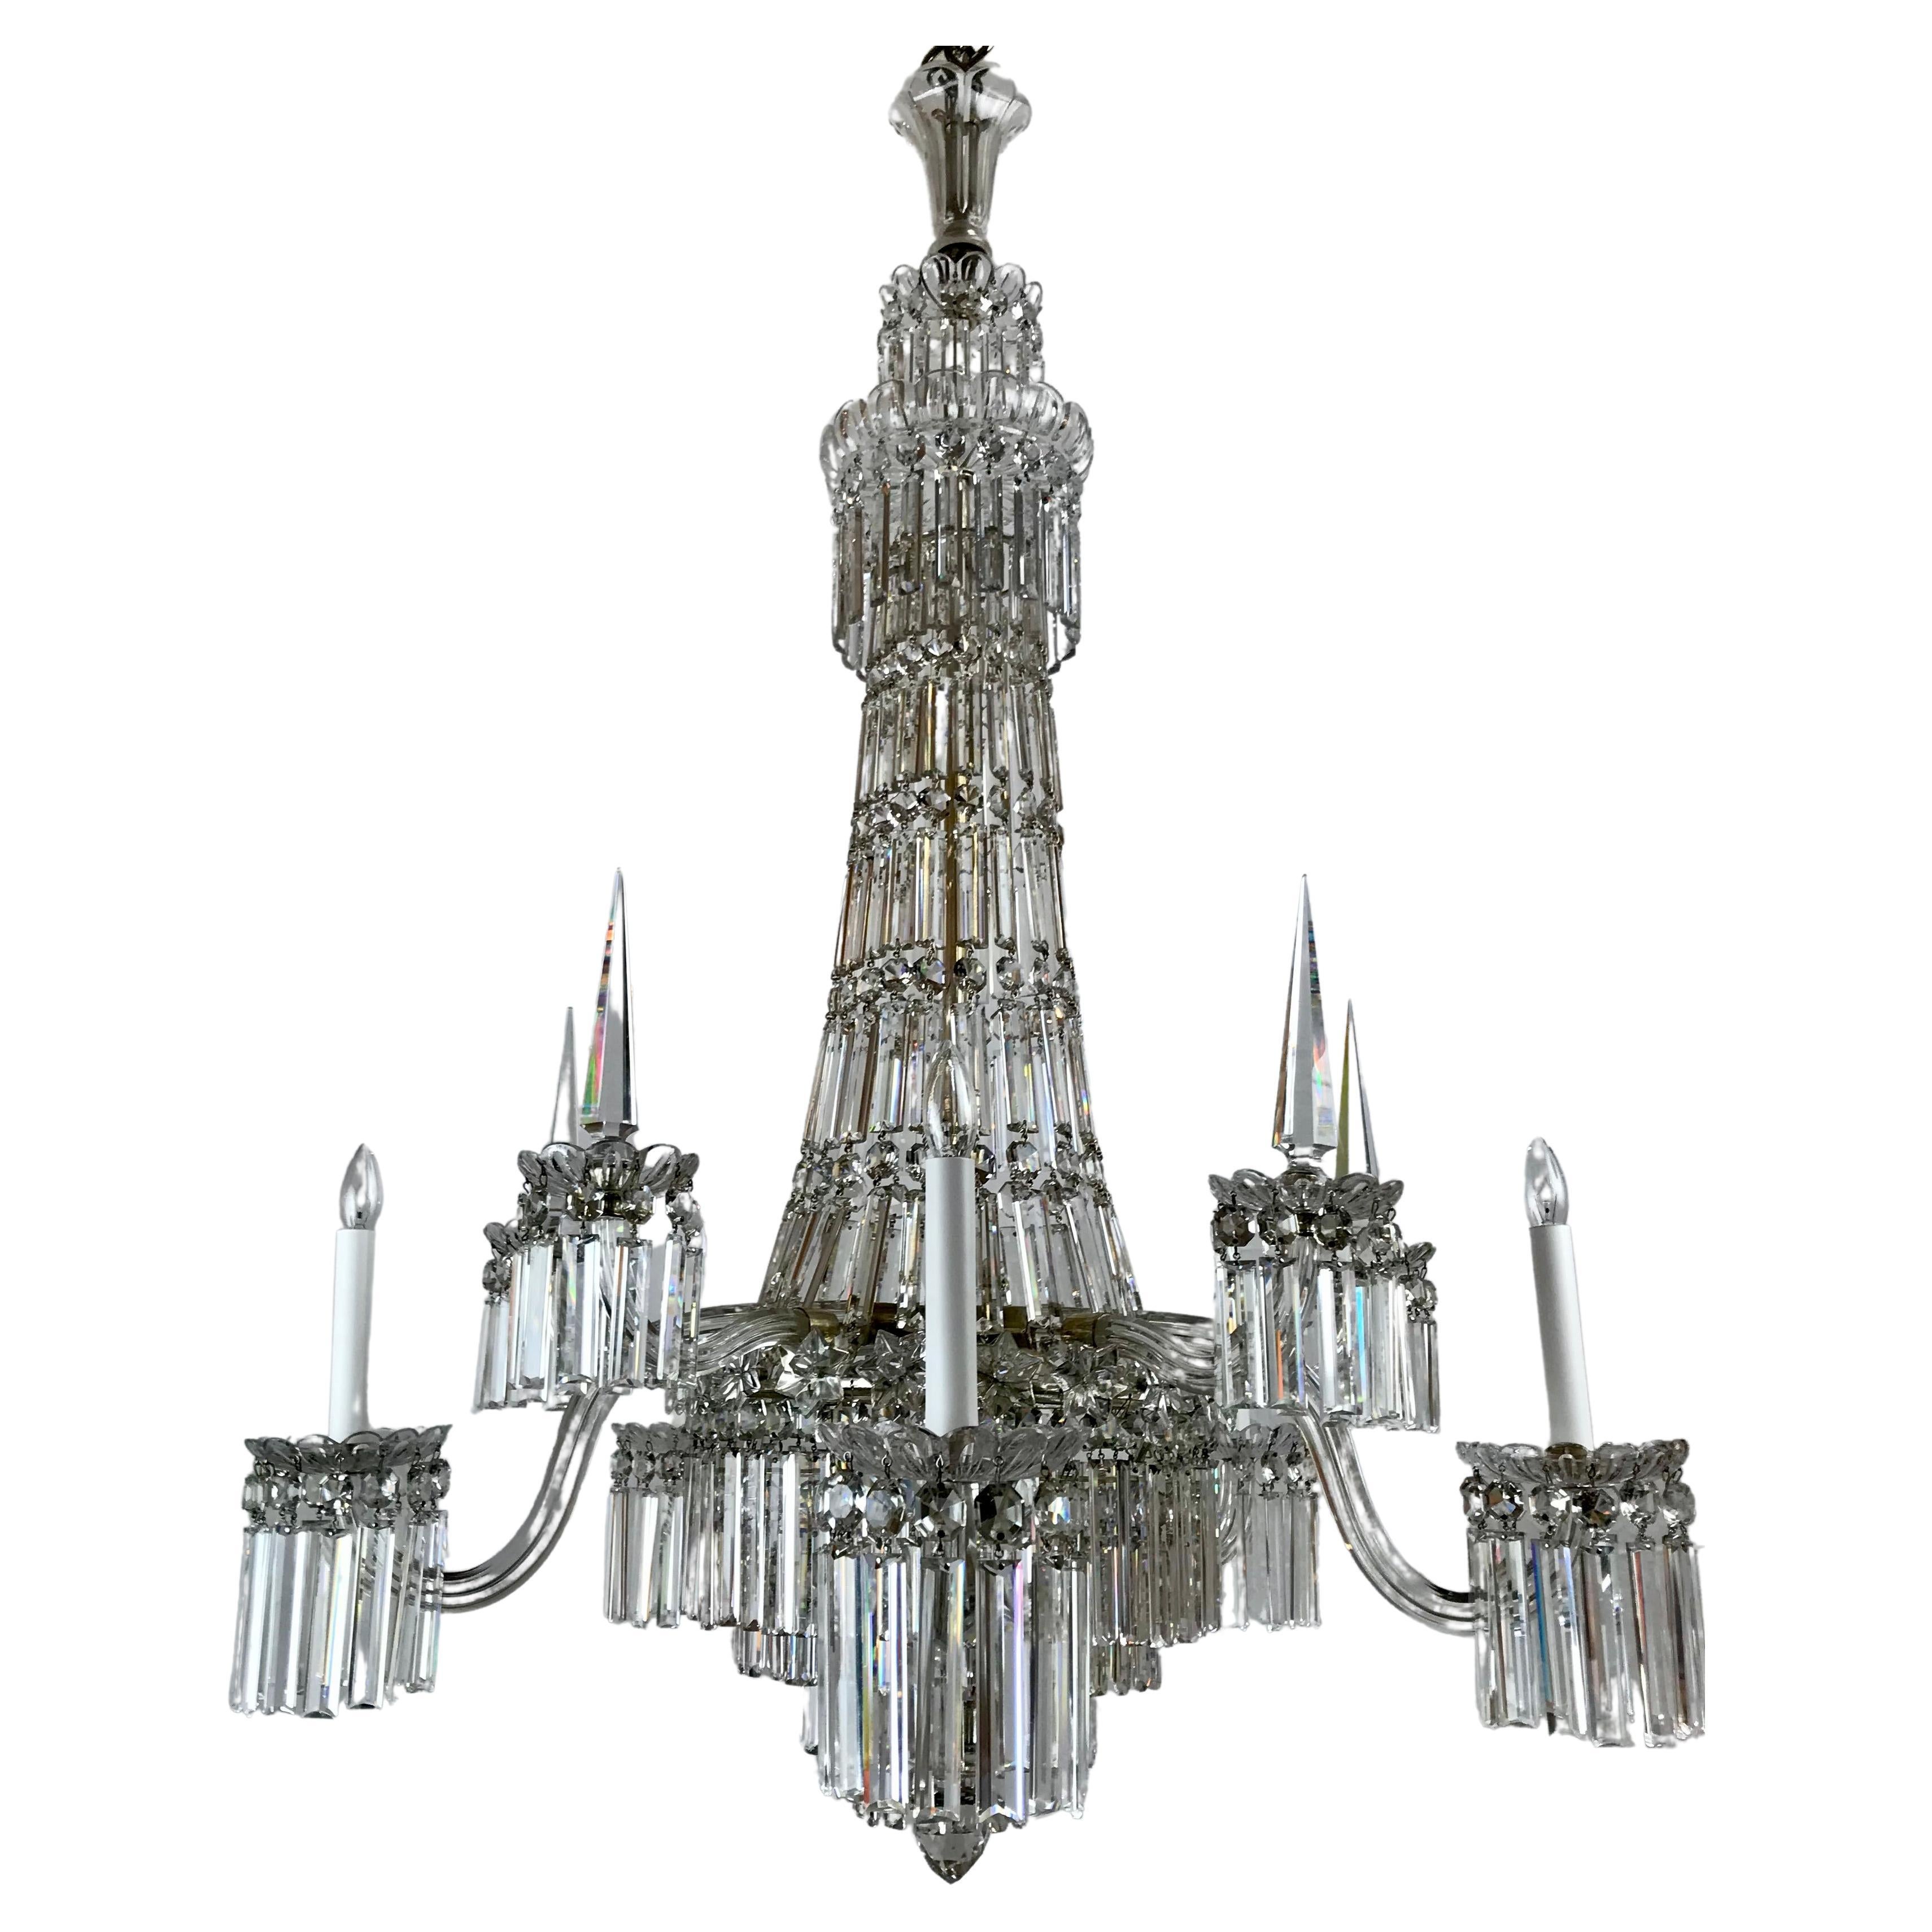  Mid 19th Century Crystal Chandelier by F&C Osler of Tent and Waterfall Design